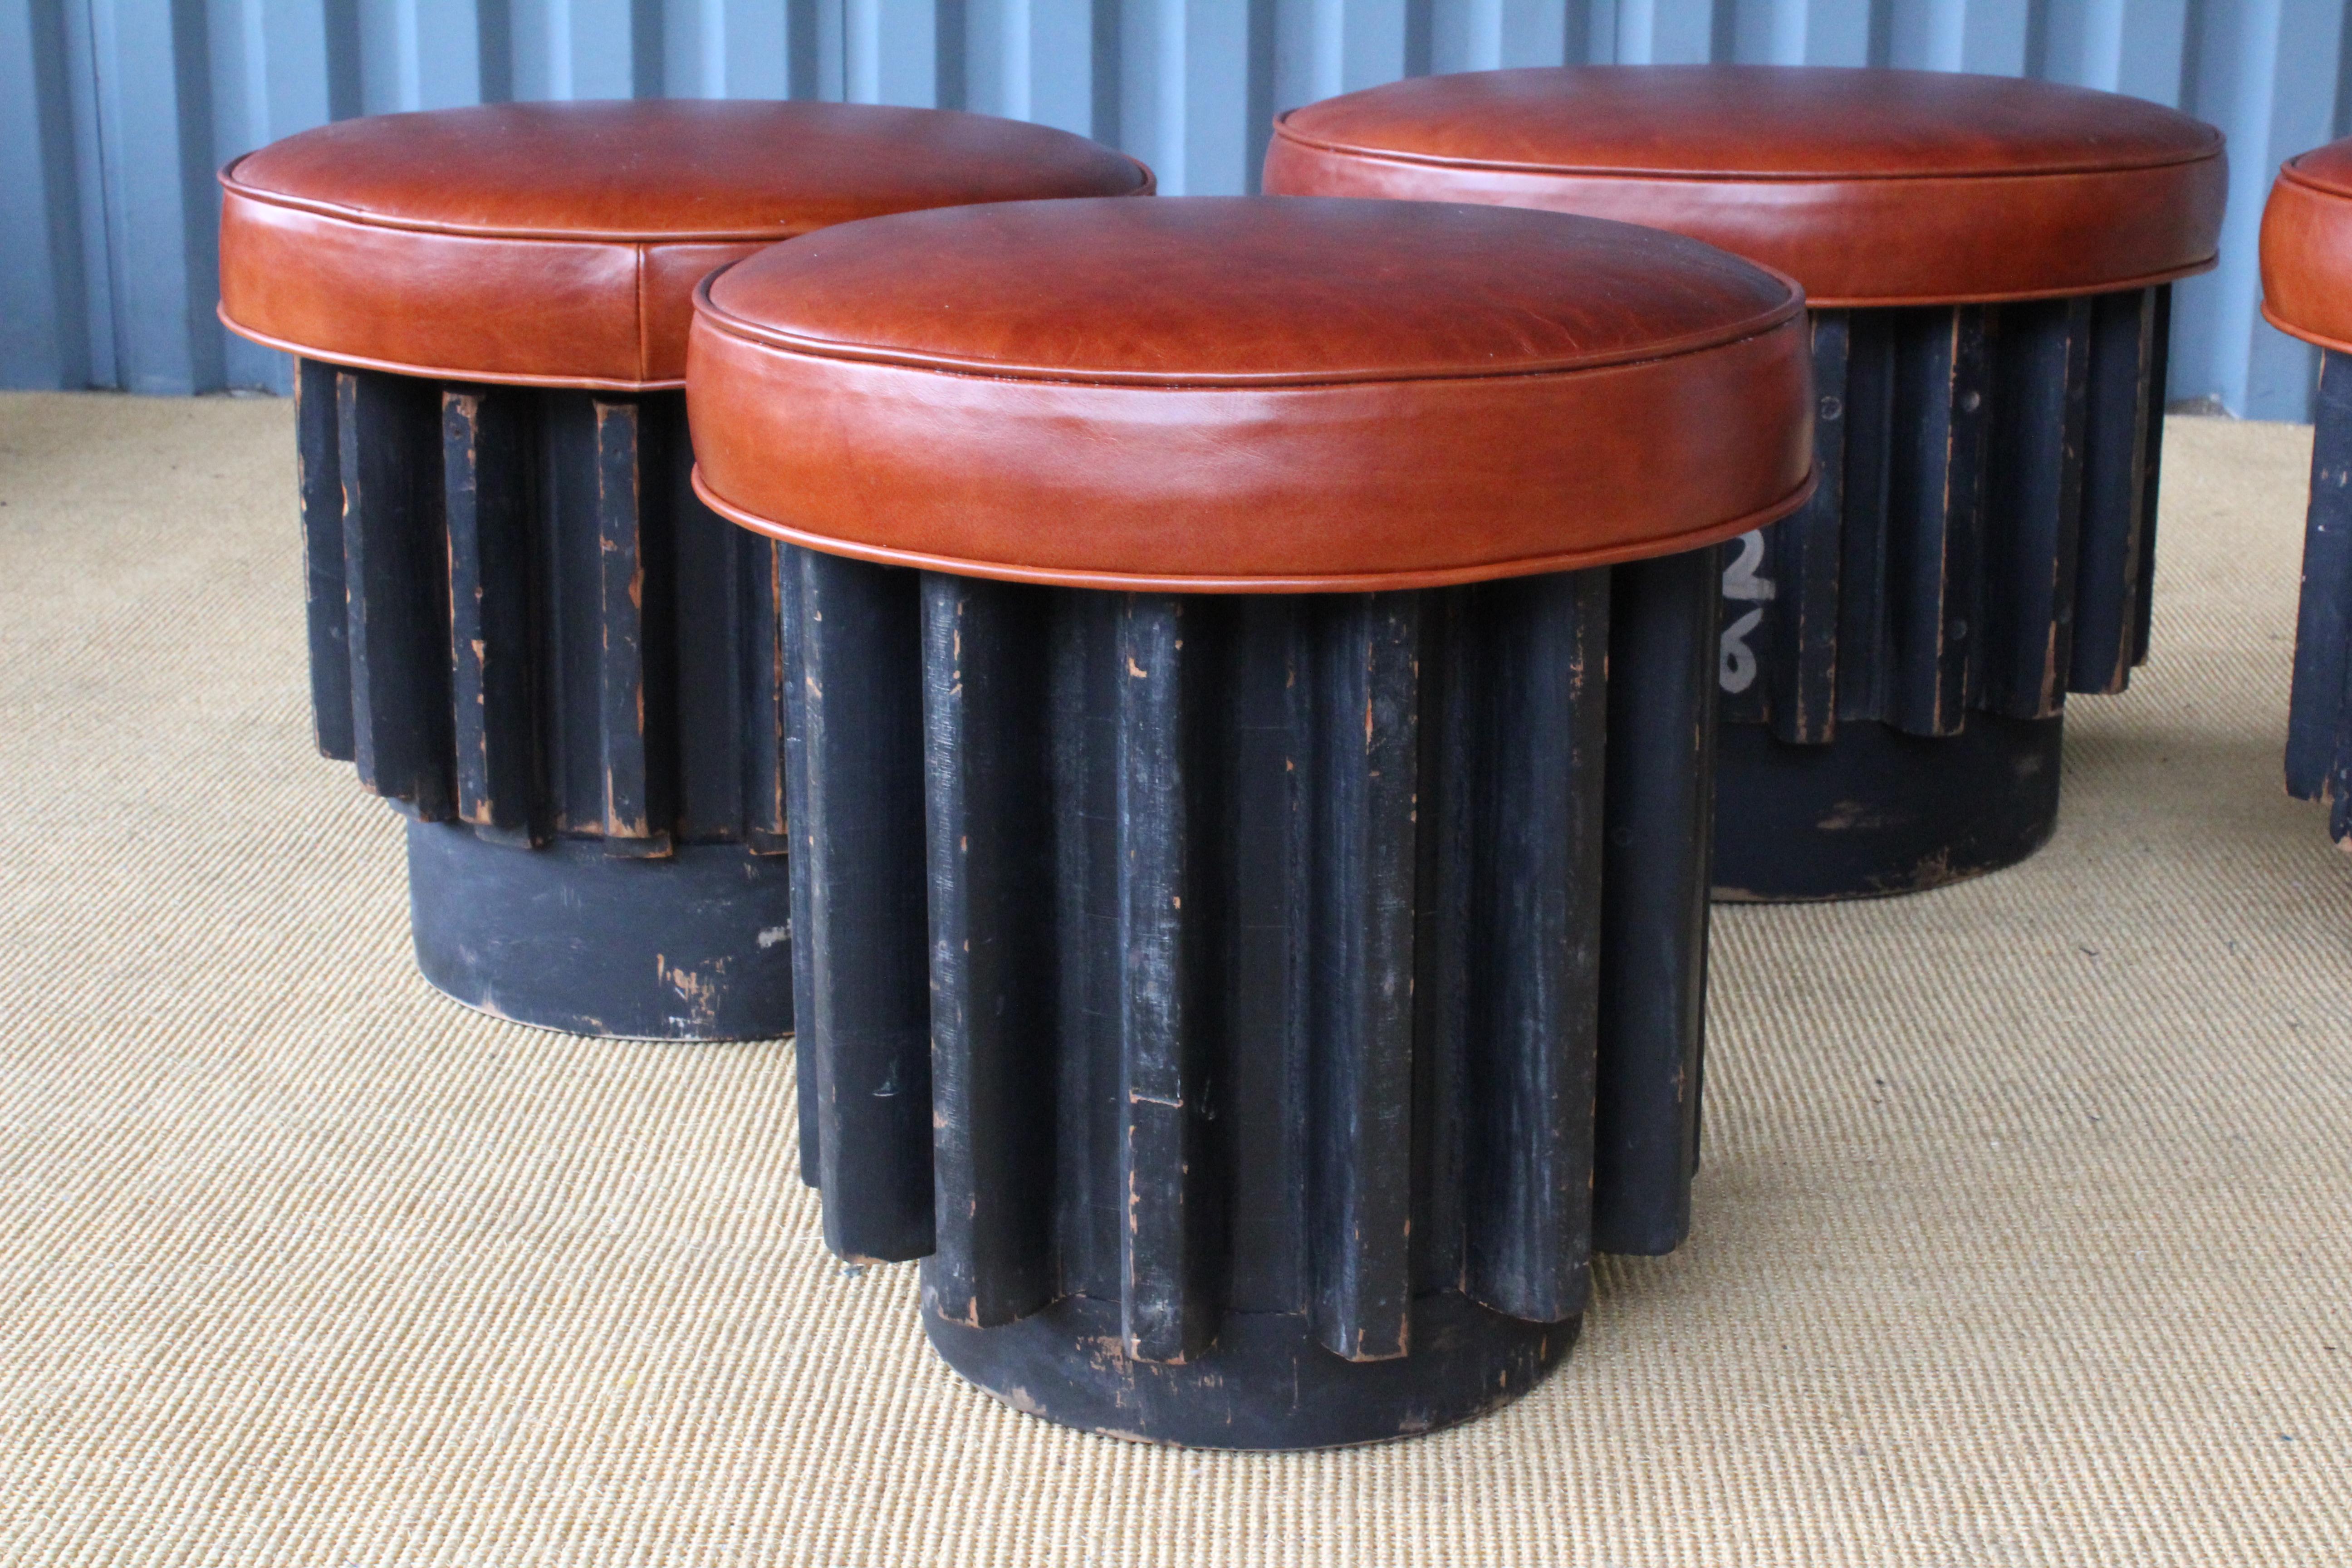 American Industrial Gear Molds Turned into Stools, California, 1940s.